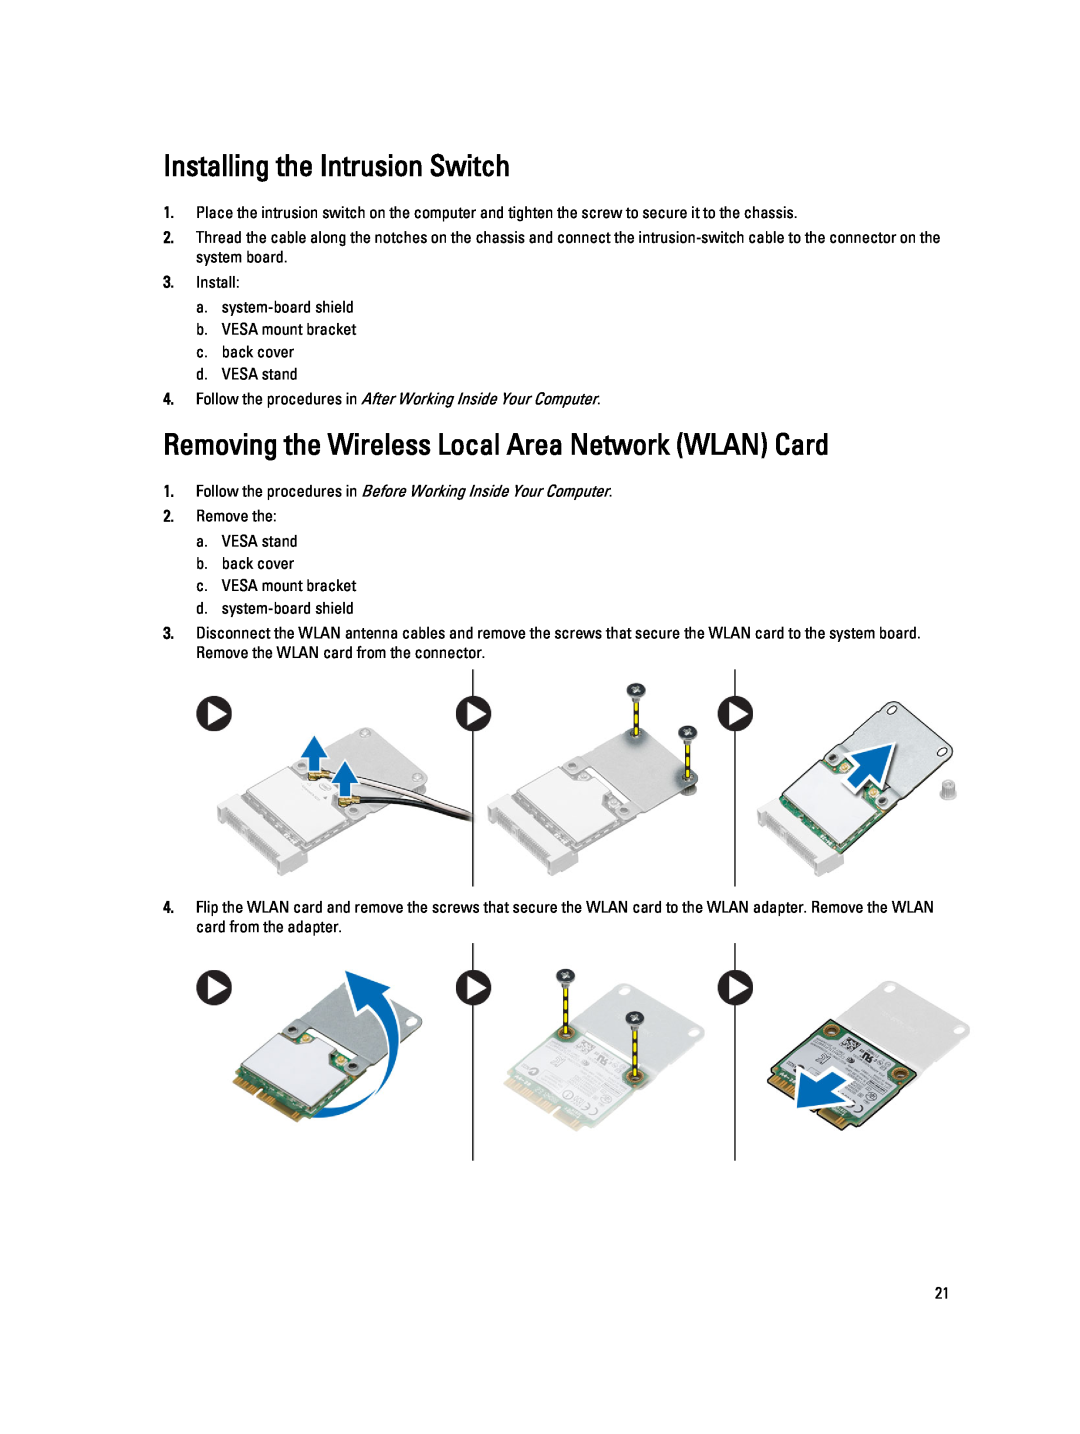 Dell W04C owner manual Installing the Intrusion Switch, Removing the Wireless Local Area Network WLAN Card 